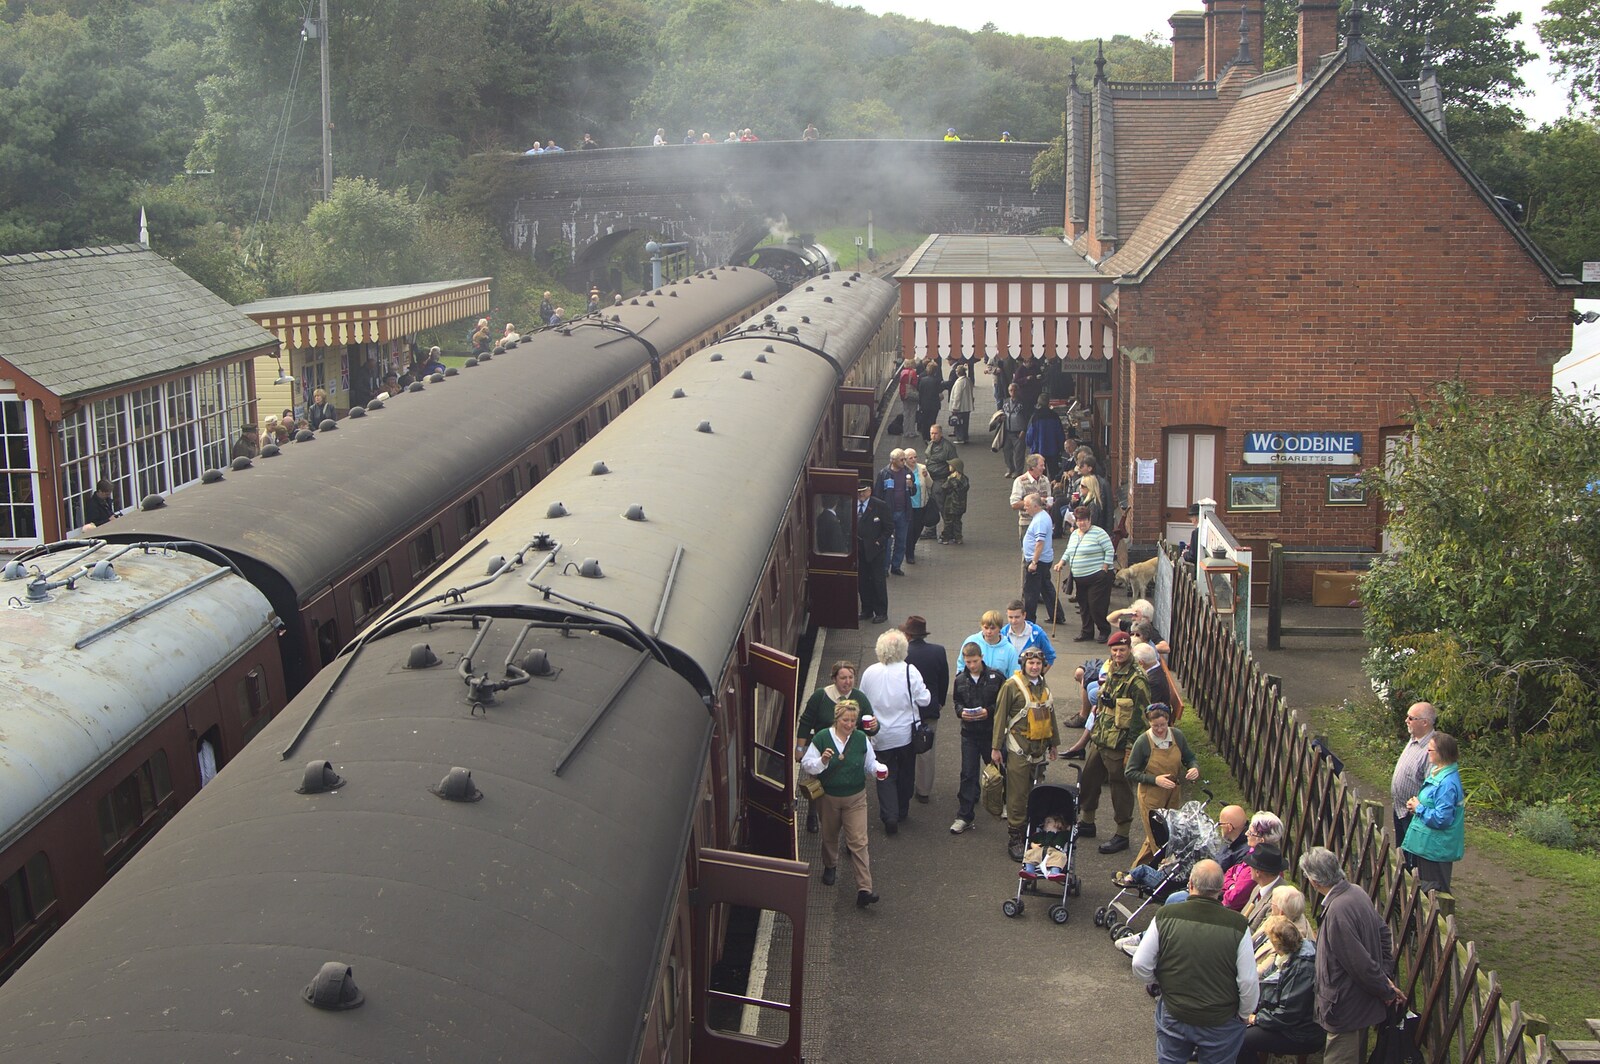 A crowded station from A 1940s Steam Weekend, Holt and Sheringham, Norfolk - 18th September 2010